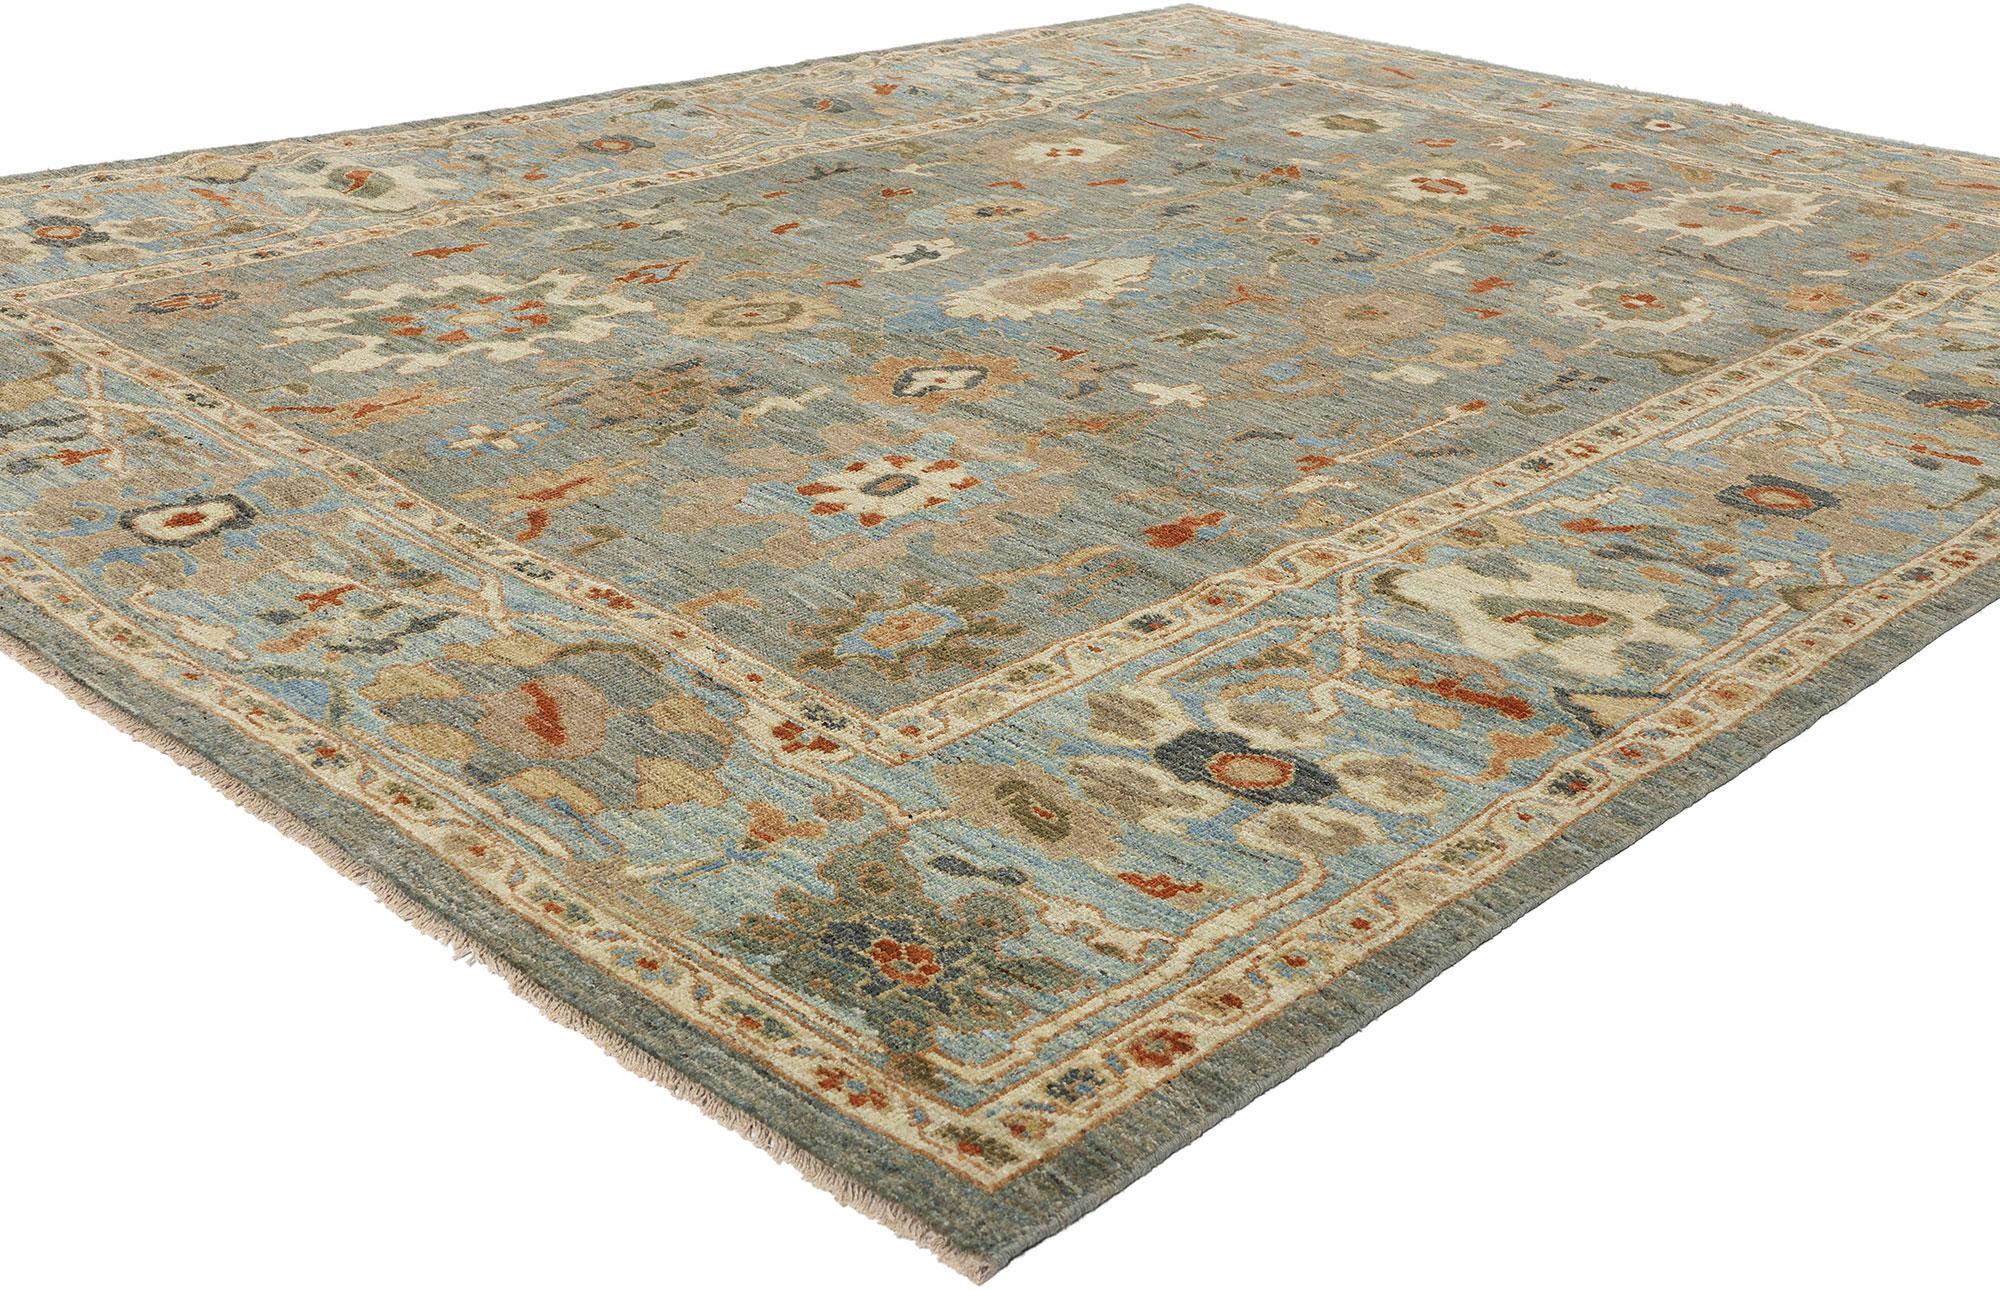 61284 Modern Blue Persian Sultanabad Rug, 08'01 x 10'07. Emerging from Iran's Sultanabad region, Persian Sultanabad rugs are renowned for their exceptional craftsmanship, durable materials, and exquisite artistry. Woven with painstaking precision by